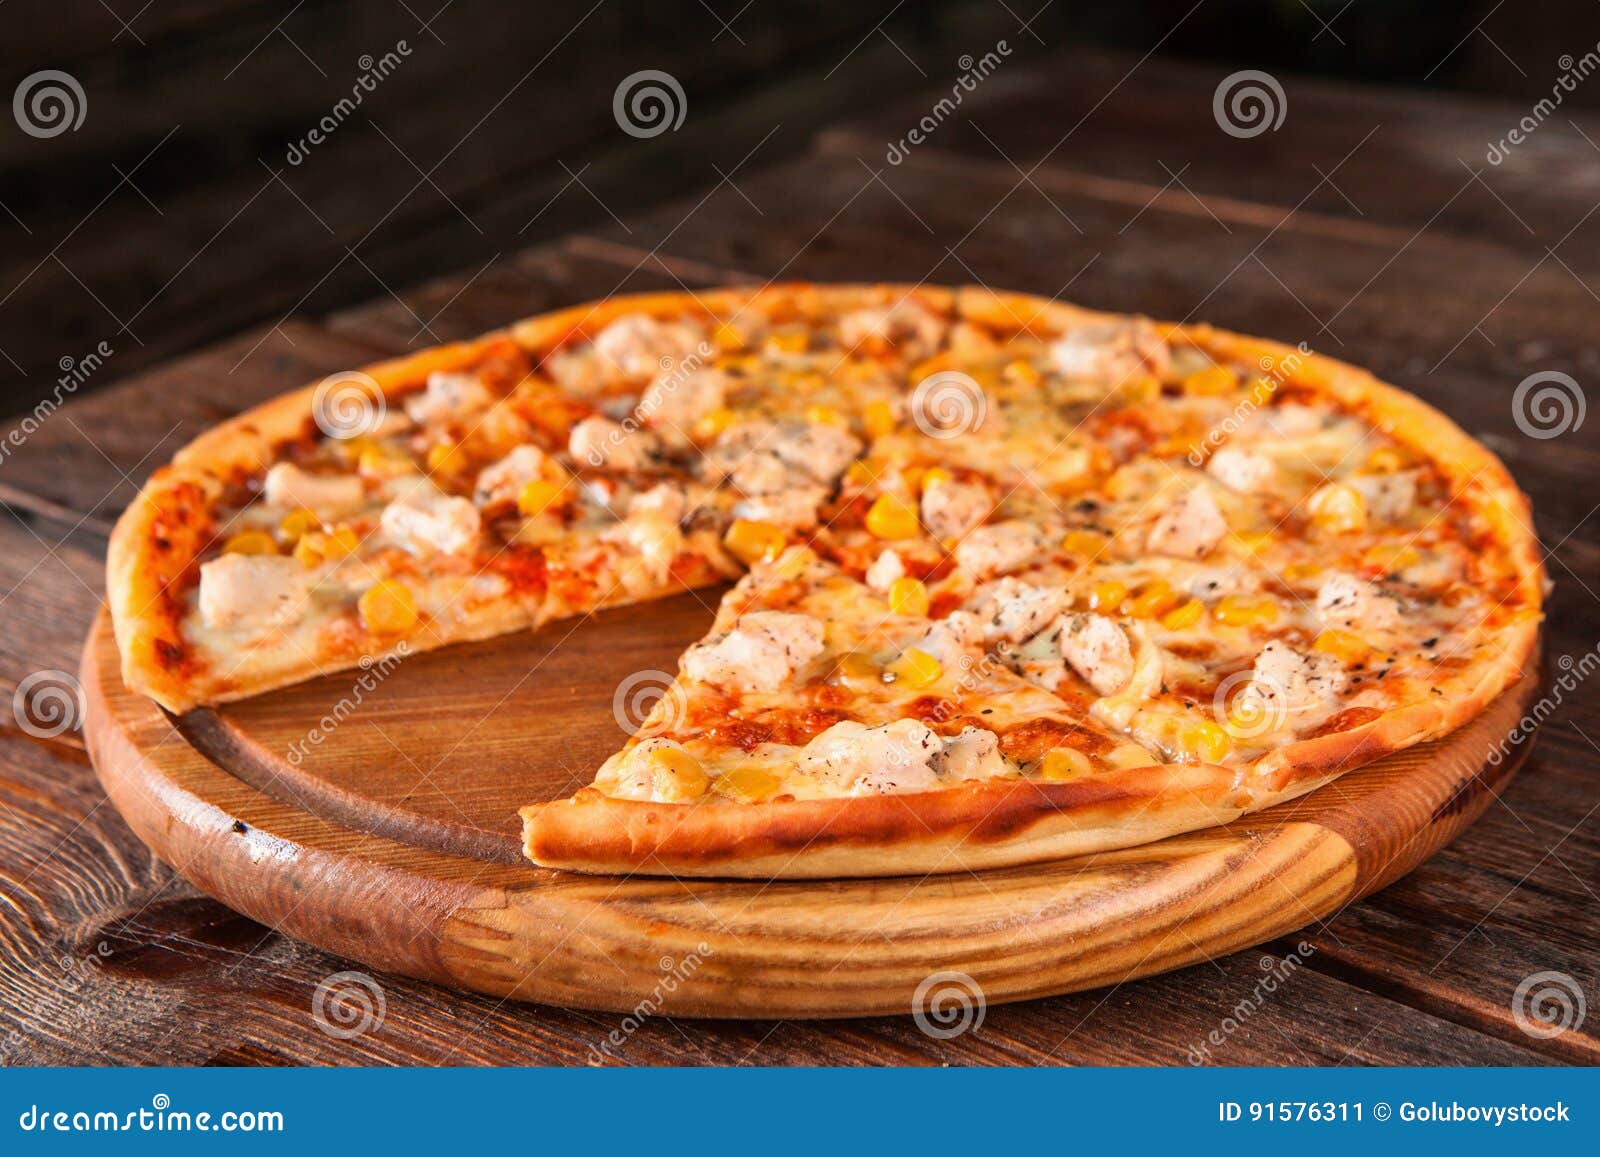 pizza cut on slices, top view. junk food, calories stock image